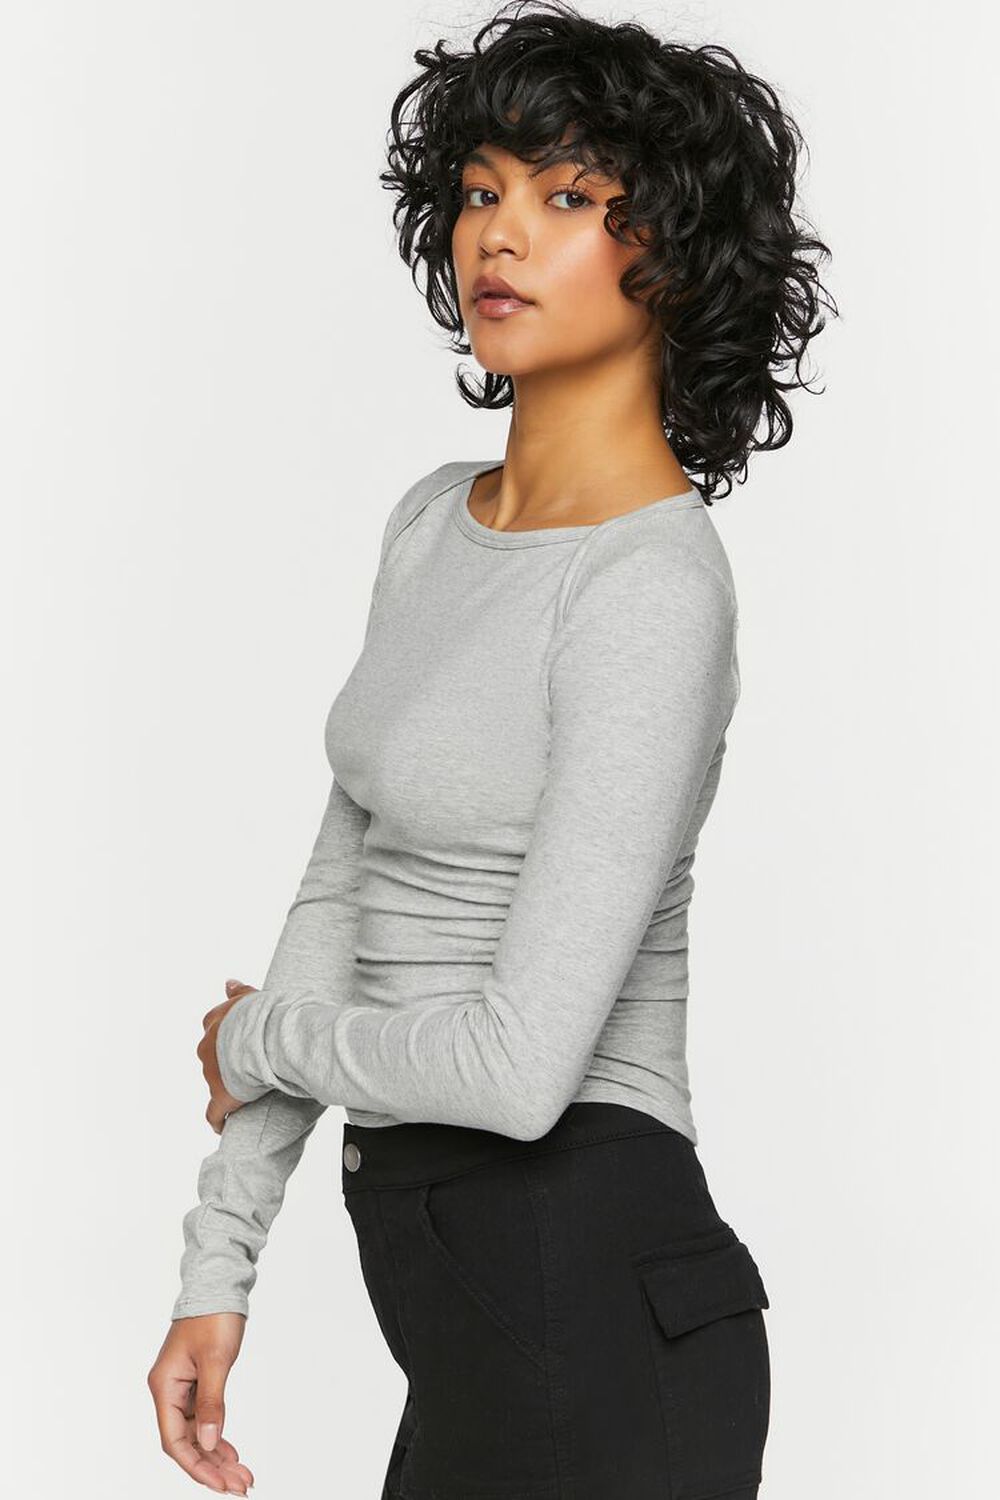 HEATHER GREY Ruched Long-Sleeve Tee, image 2